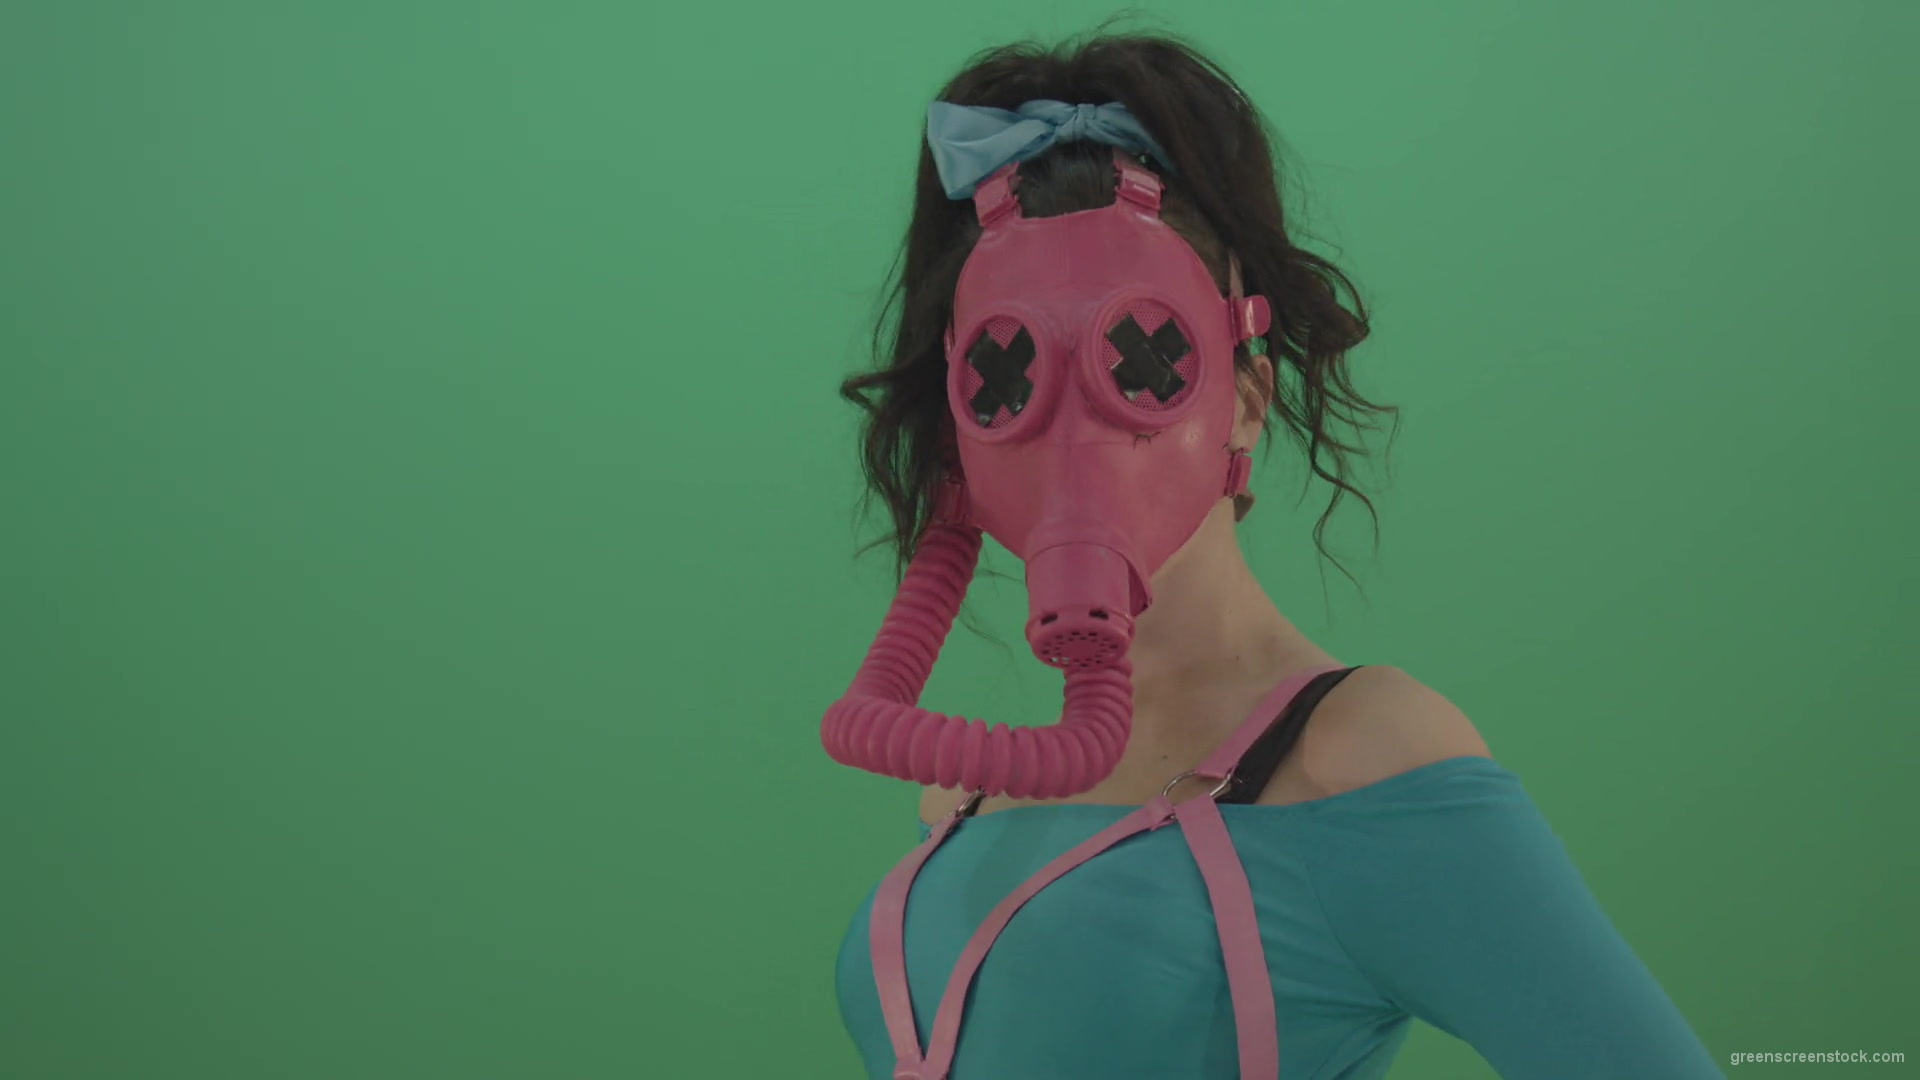 Pink-head-in-Gas-Mask-moving-Go-Go-Dance-isolated-on-green-screen-4K-Video-Footage-1920_009 Green Screen Stock